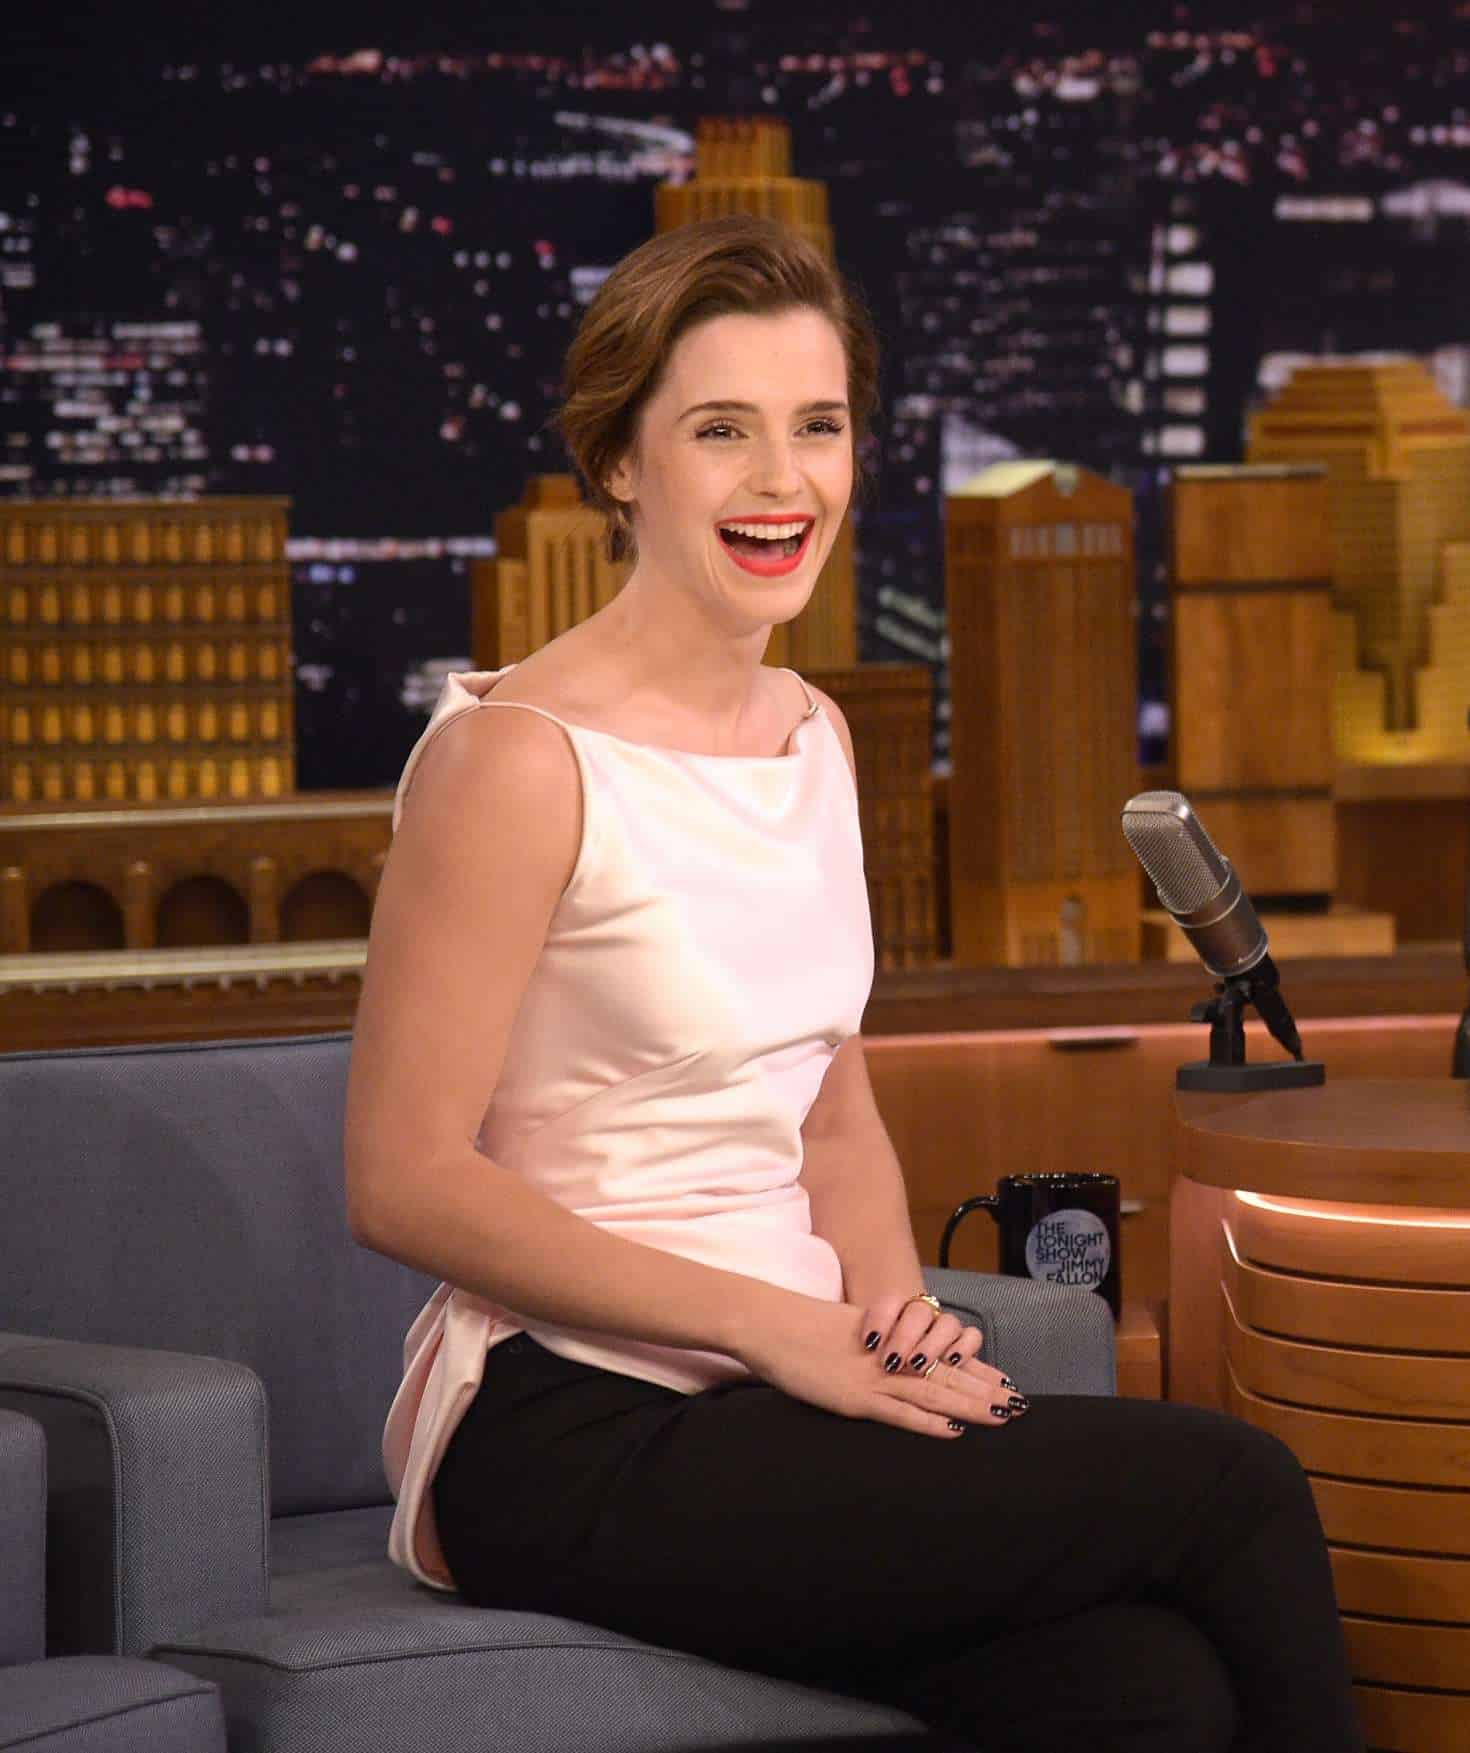 Emma Watson Talks About her Movie “Beauty and the Beast” with Jimmy Fallon